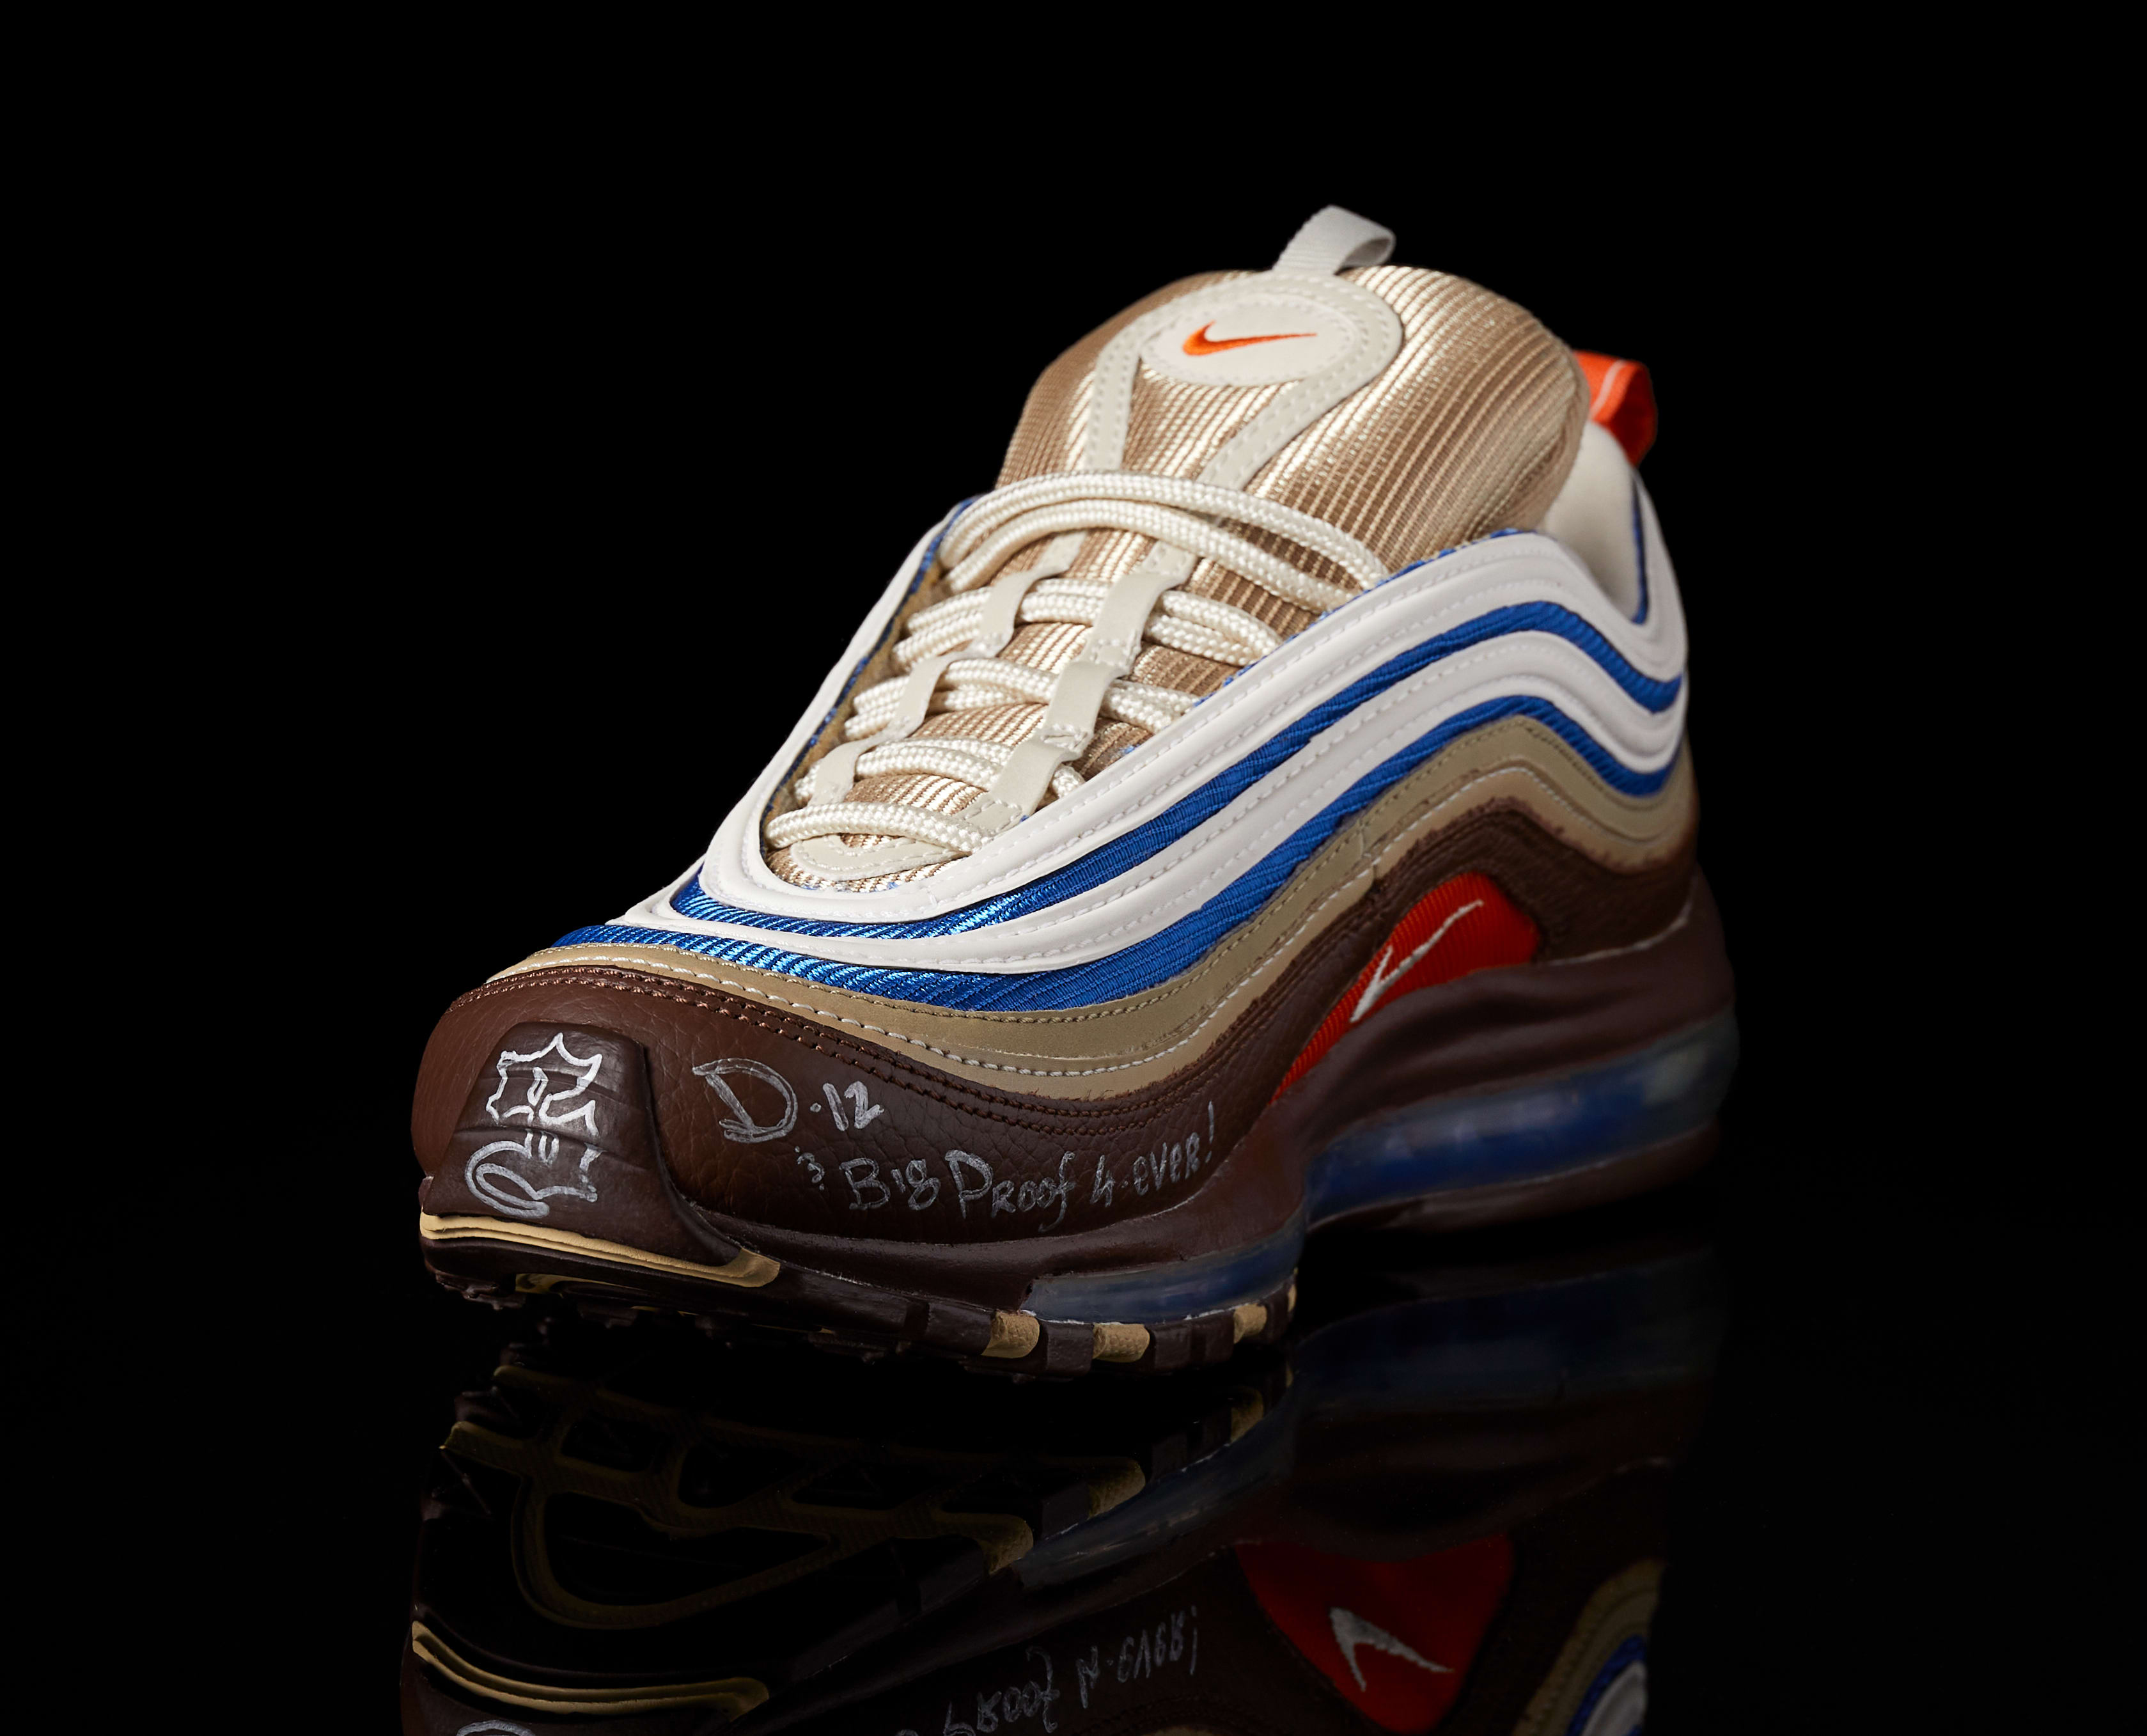 The RealReal Nike Air Max 97 'Eminem' Air Max Day Sole Collector